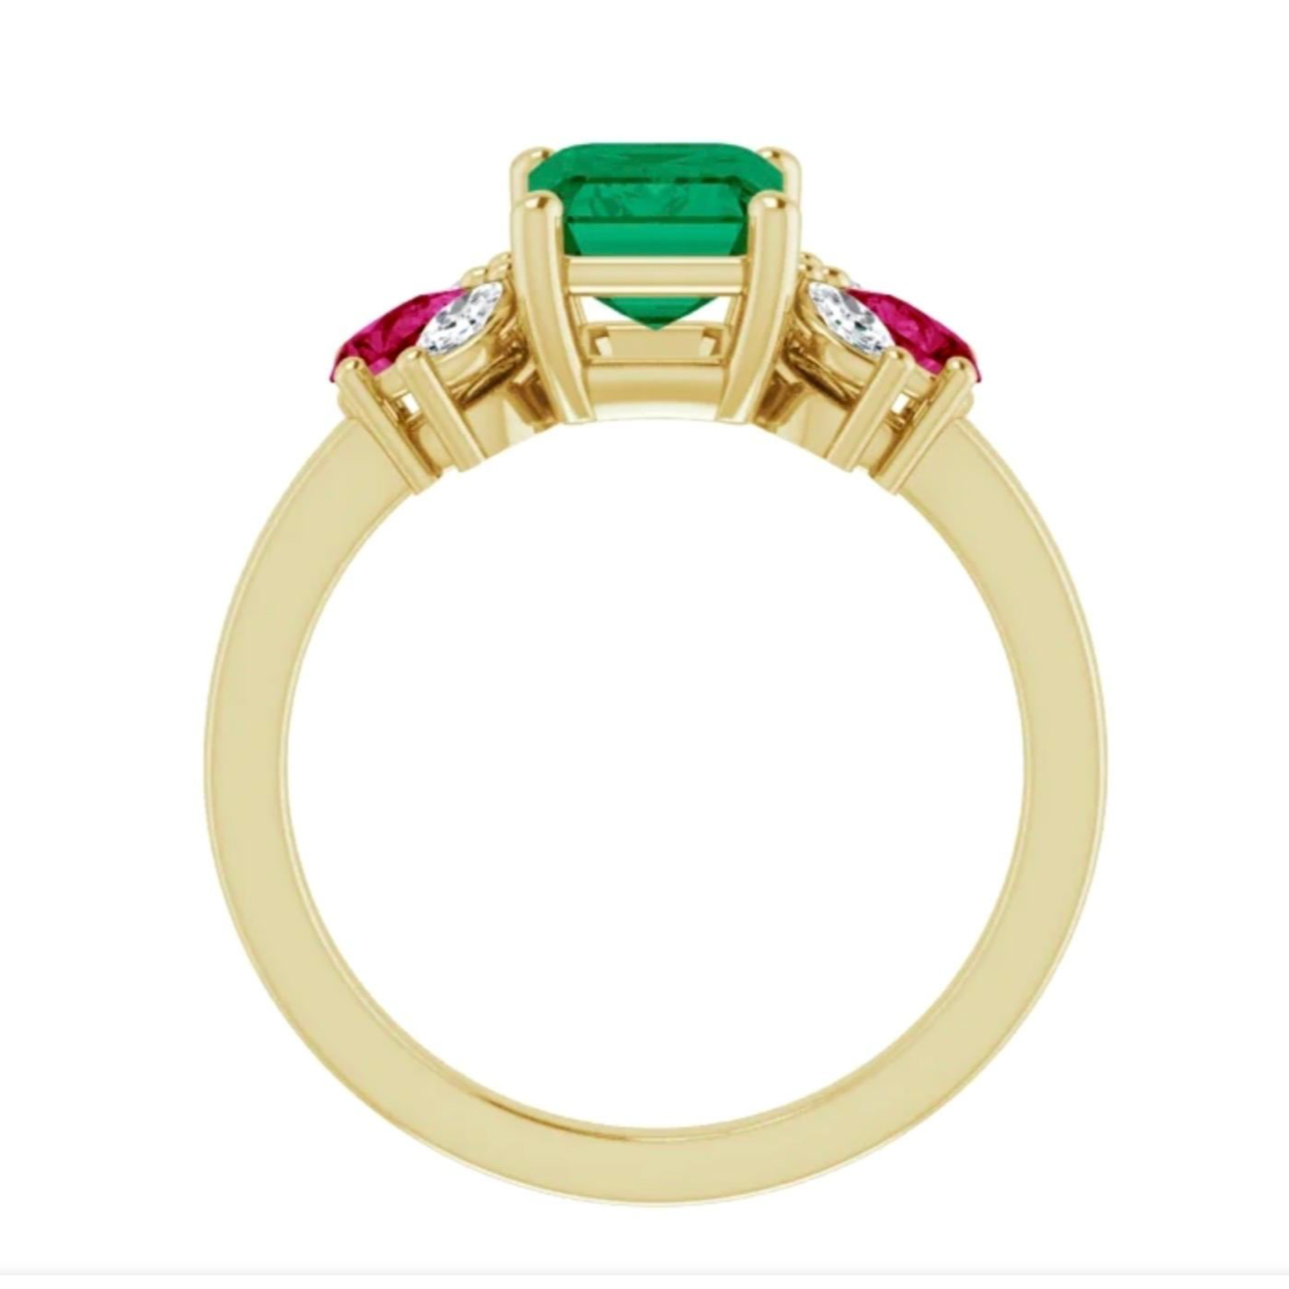 Colombian Emerald Ruby and Diamond Ring 18K yellow Gold